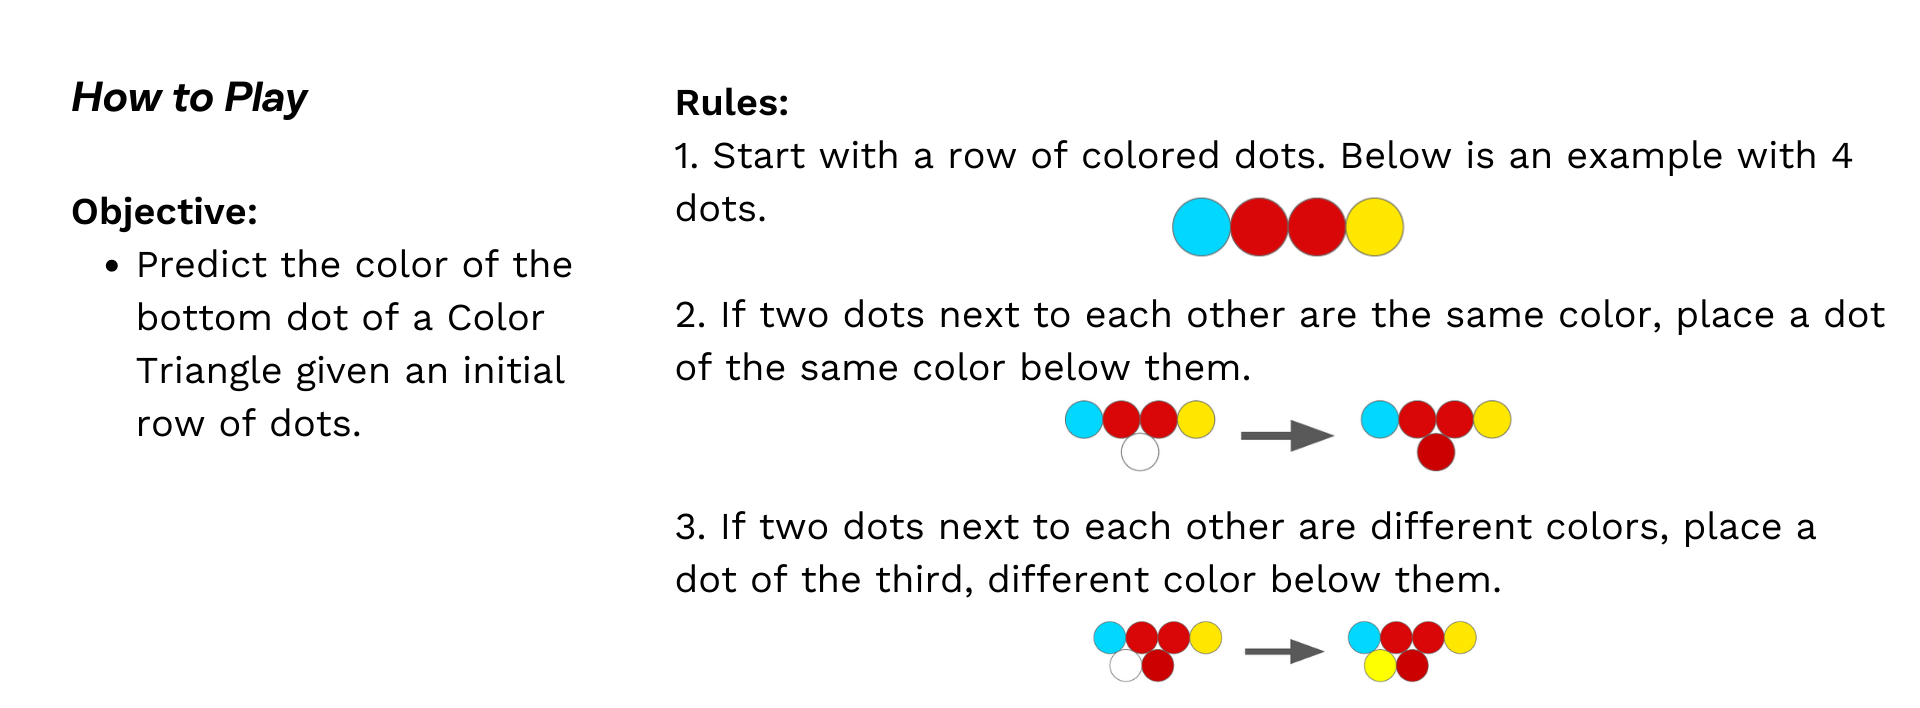 Objective: Predict the color of the bottom dot of a Color Triangle given an initial row of dots.